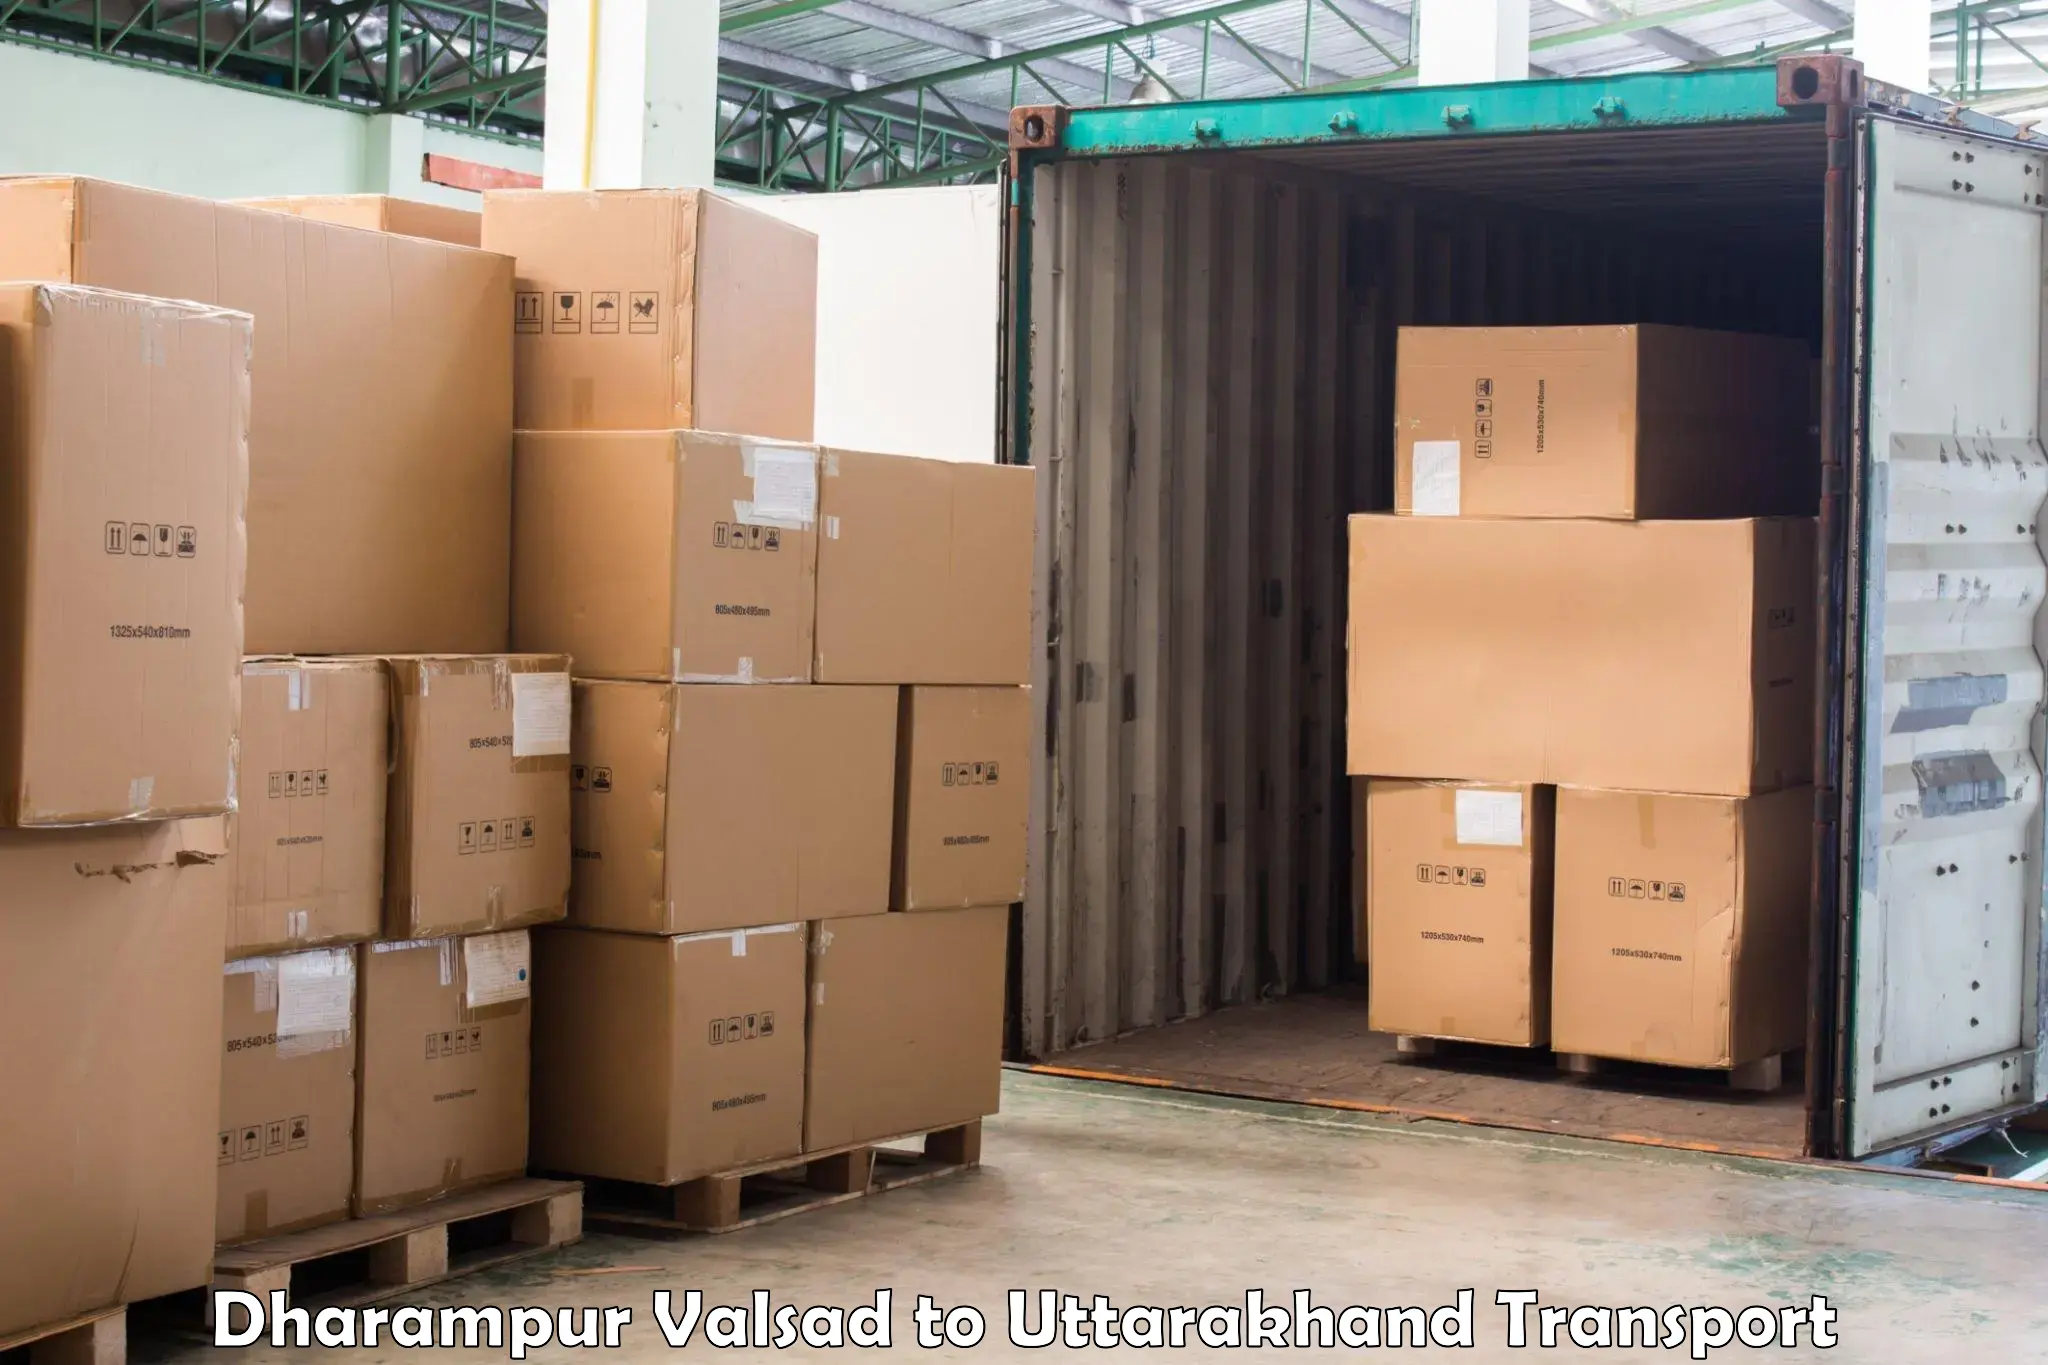 Truck transport companies in India Dharampur Valsad to Gopeshwar